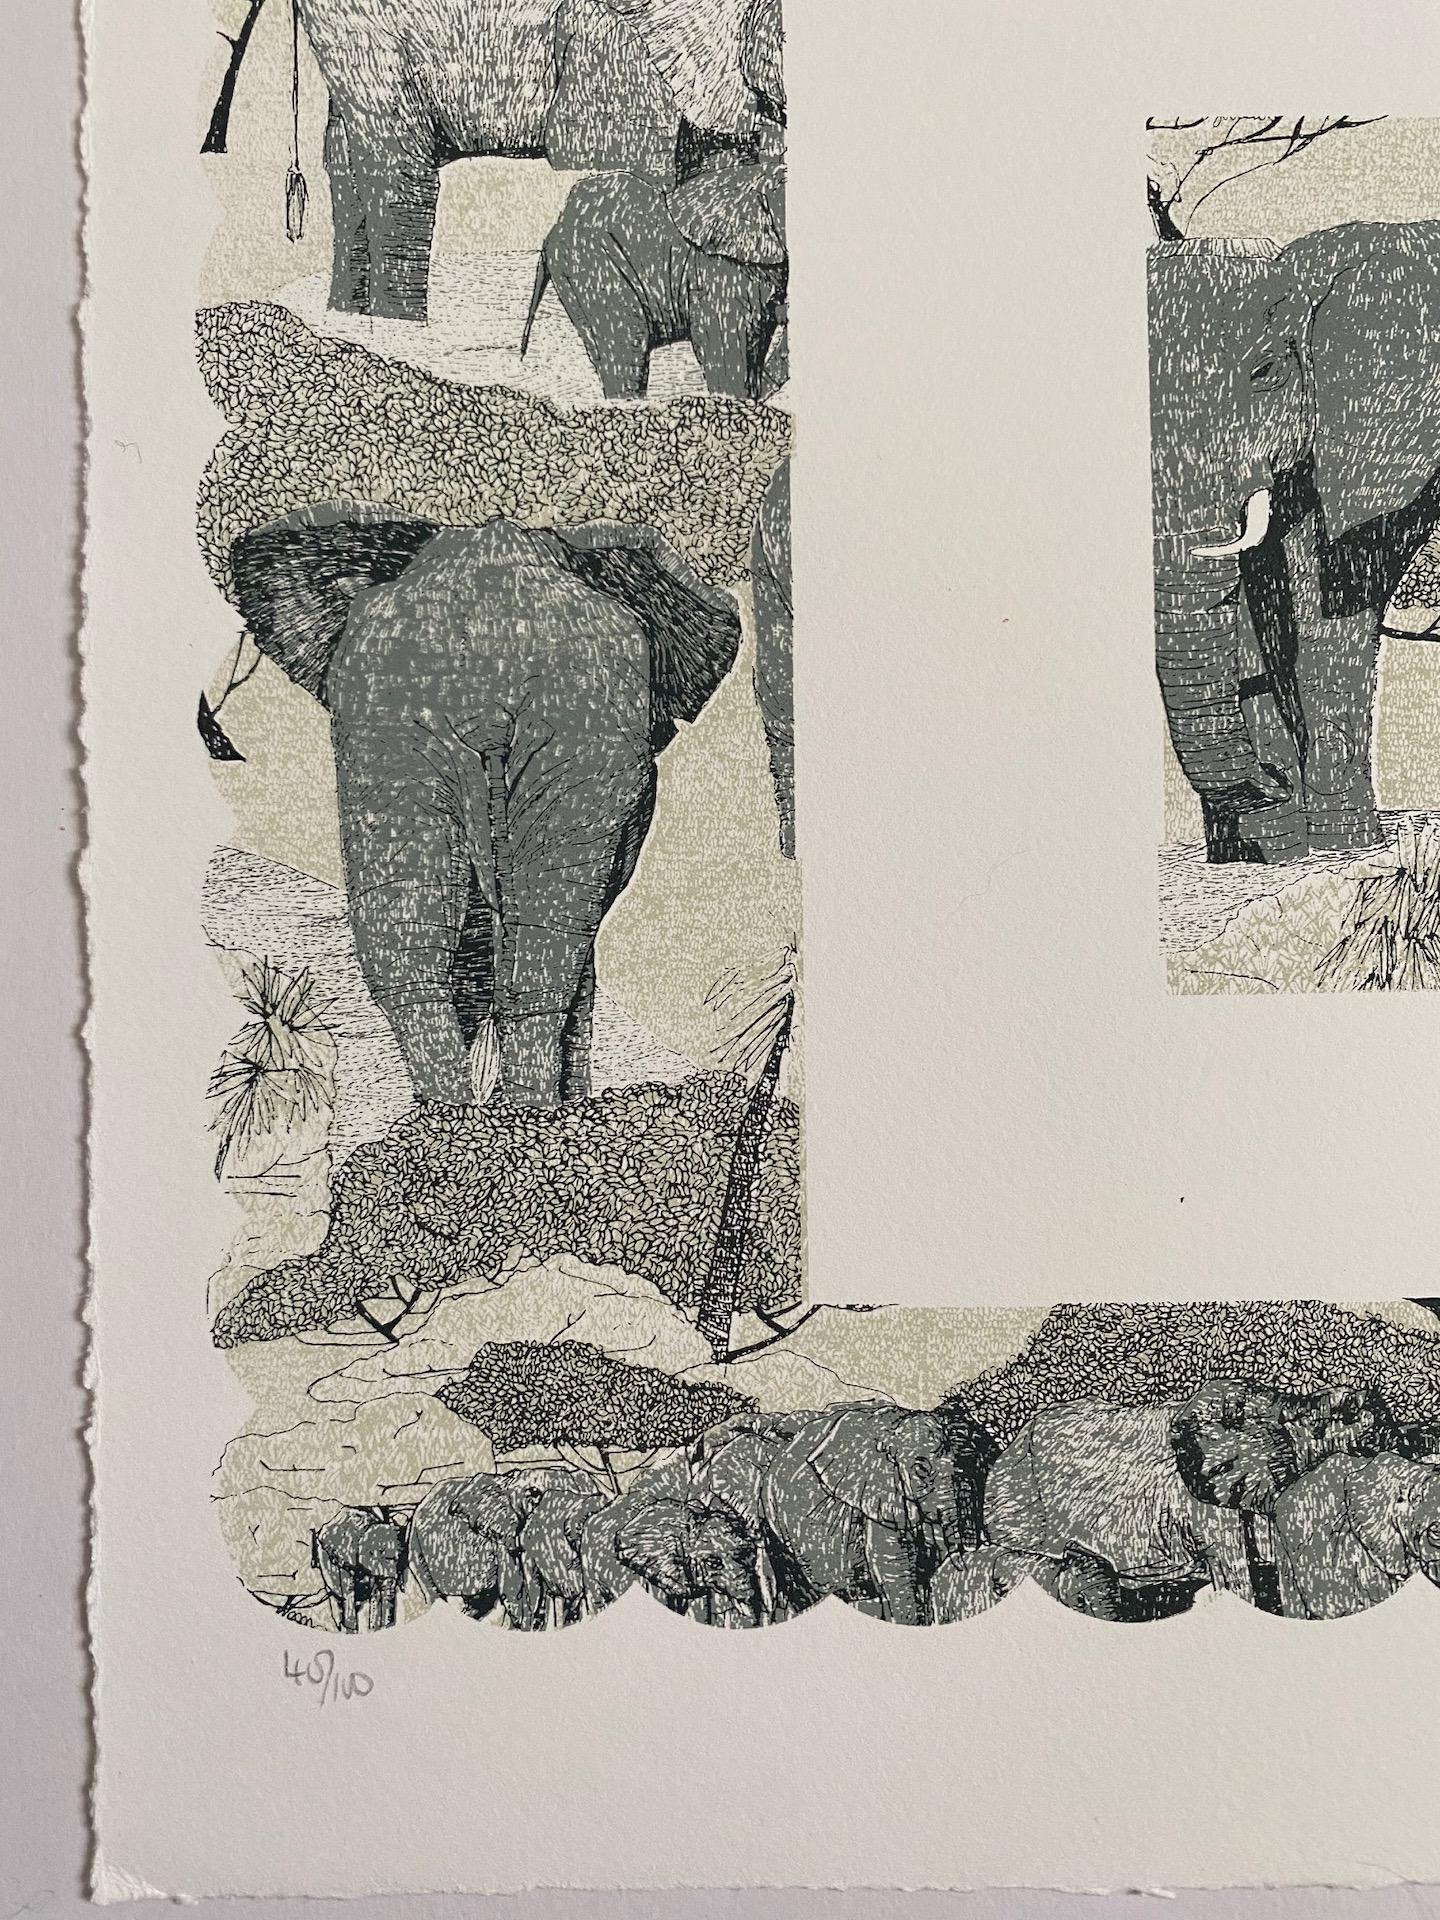 Clare Halifax
E is for Elephant
Limited Edition 3colour screen print
Edition of 100
Sheet Size: H 38cm x W 37cm x 0.1cm
Sold Unframed
Hand printed by the artist onto somerset satin paper 300gms with deckle edge.
Please Note that in situ images are